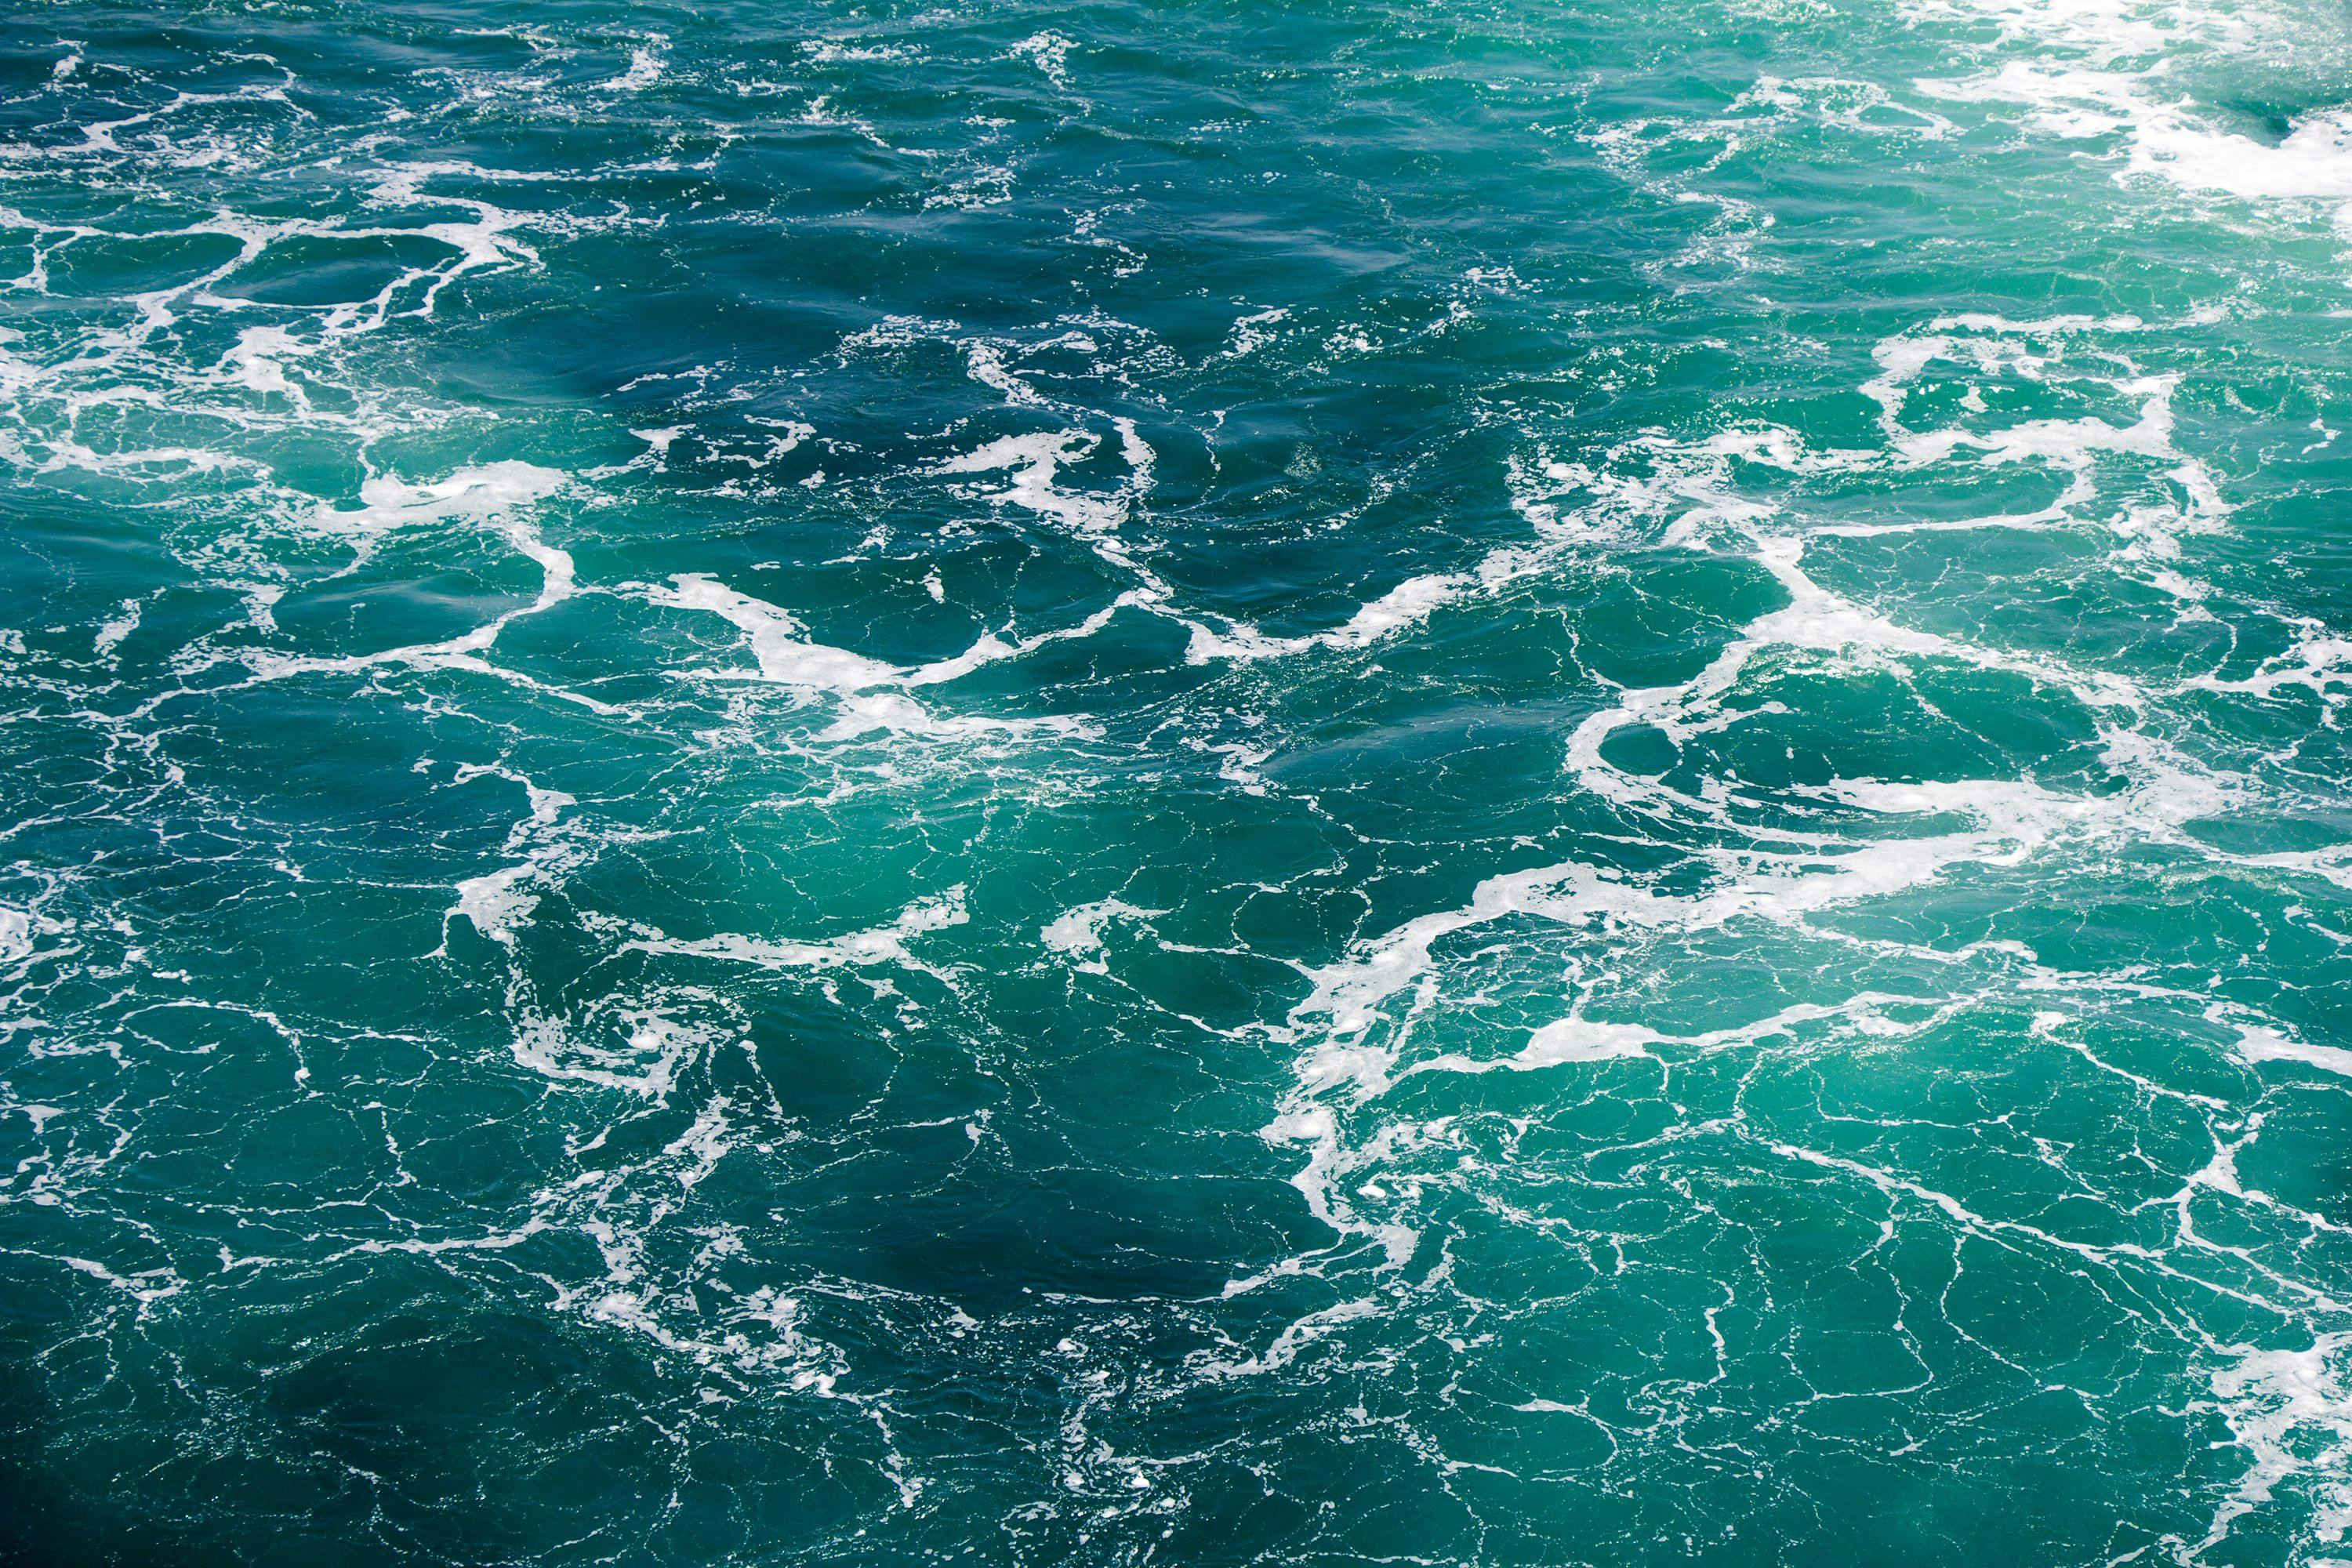 Turquoise green Seawater with sea foam as background | Image Credit: © smuki - stock.adobe.com